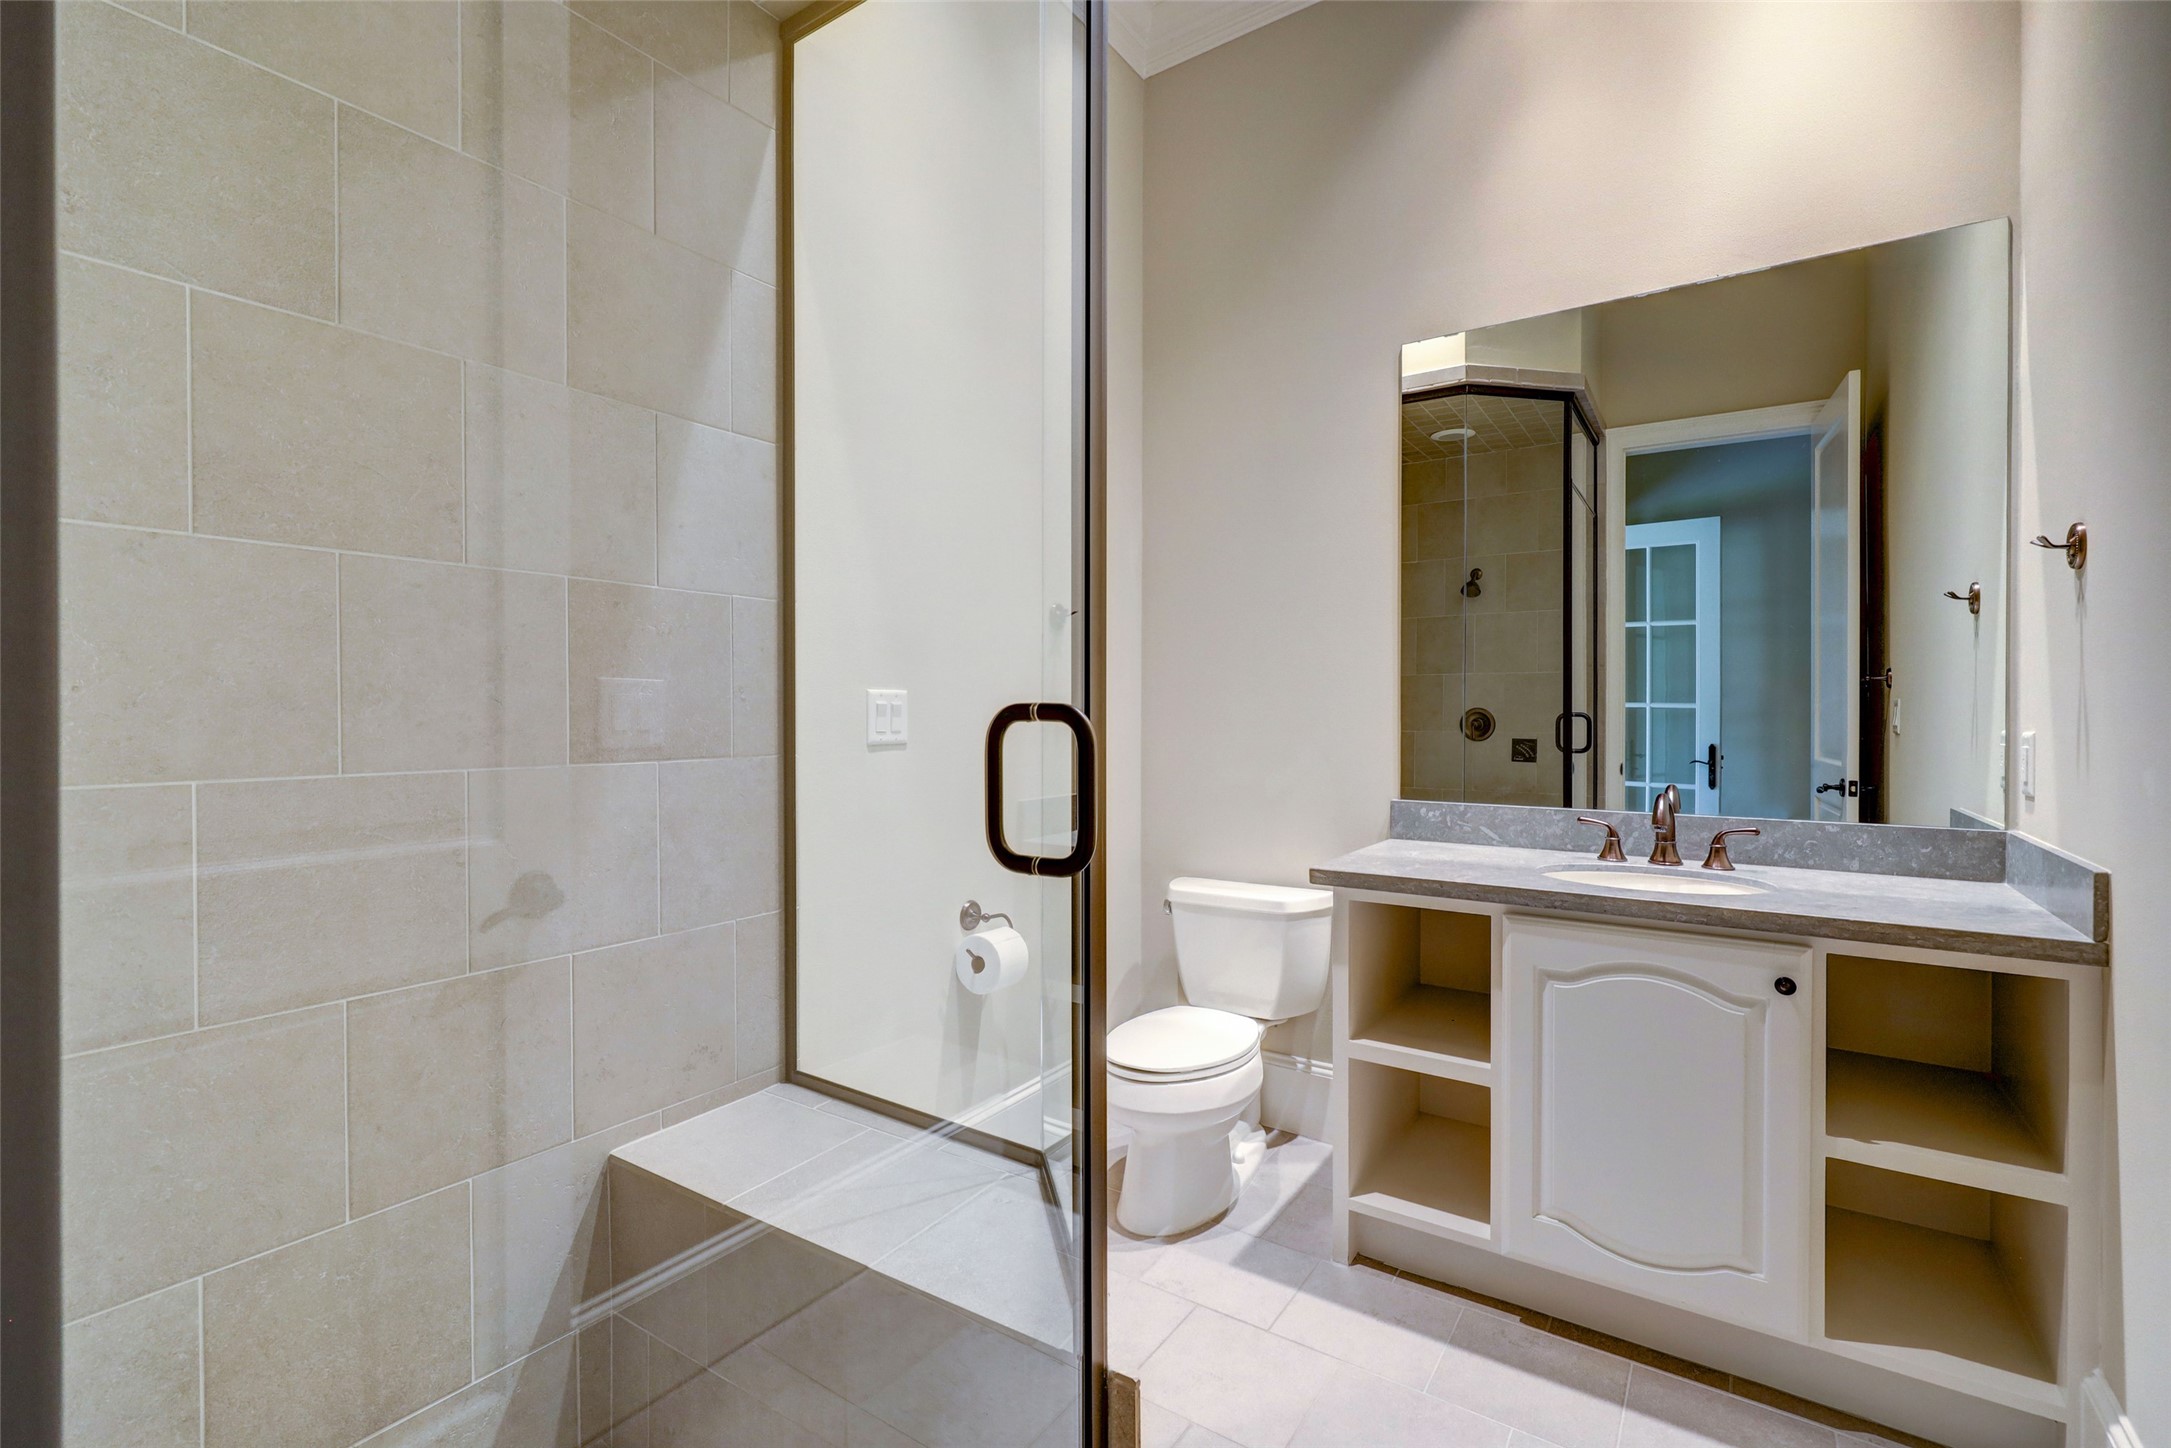 Within the Casita is a full Bath with--wait for it--a STEAM SHOWER!! Unwind like a star after a swim or a workout.